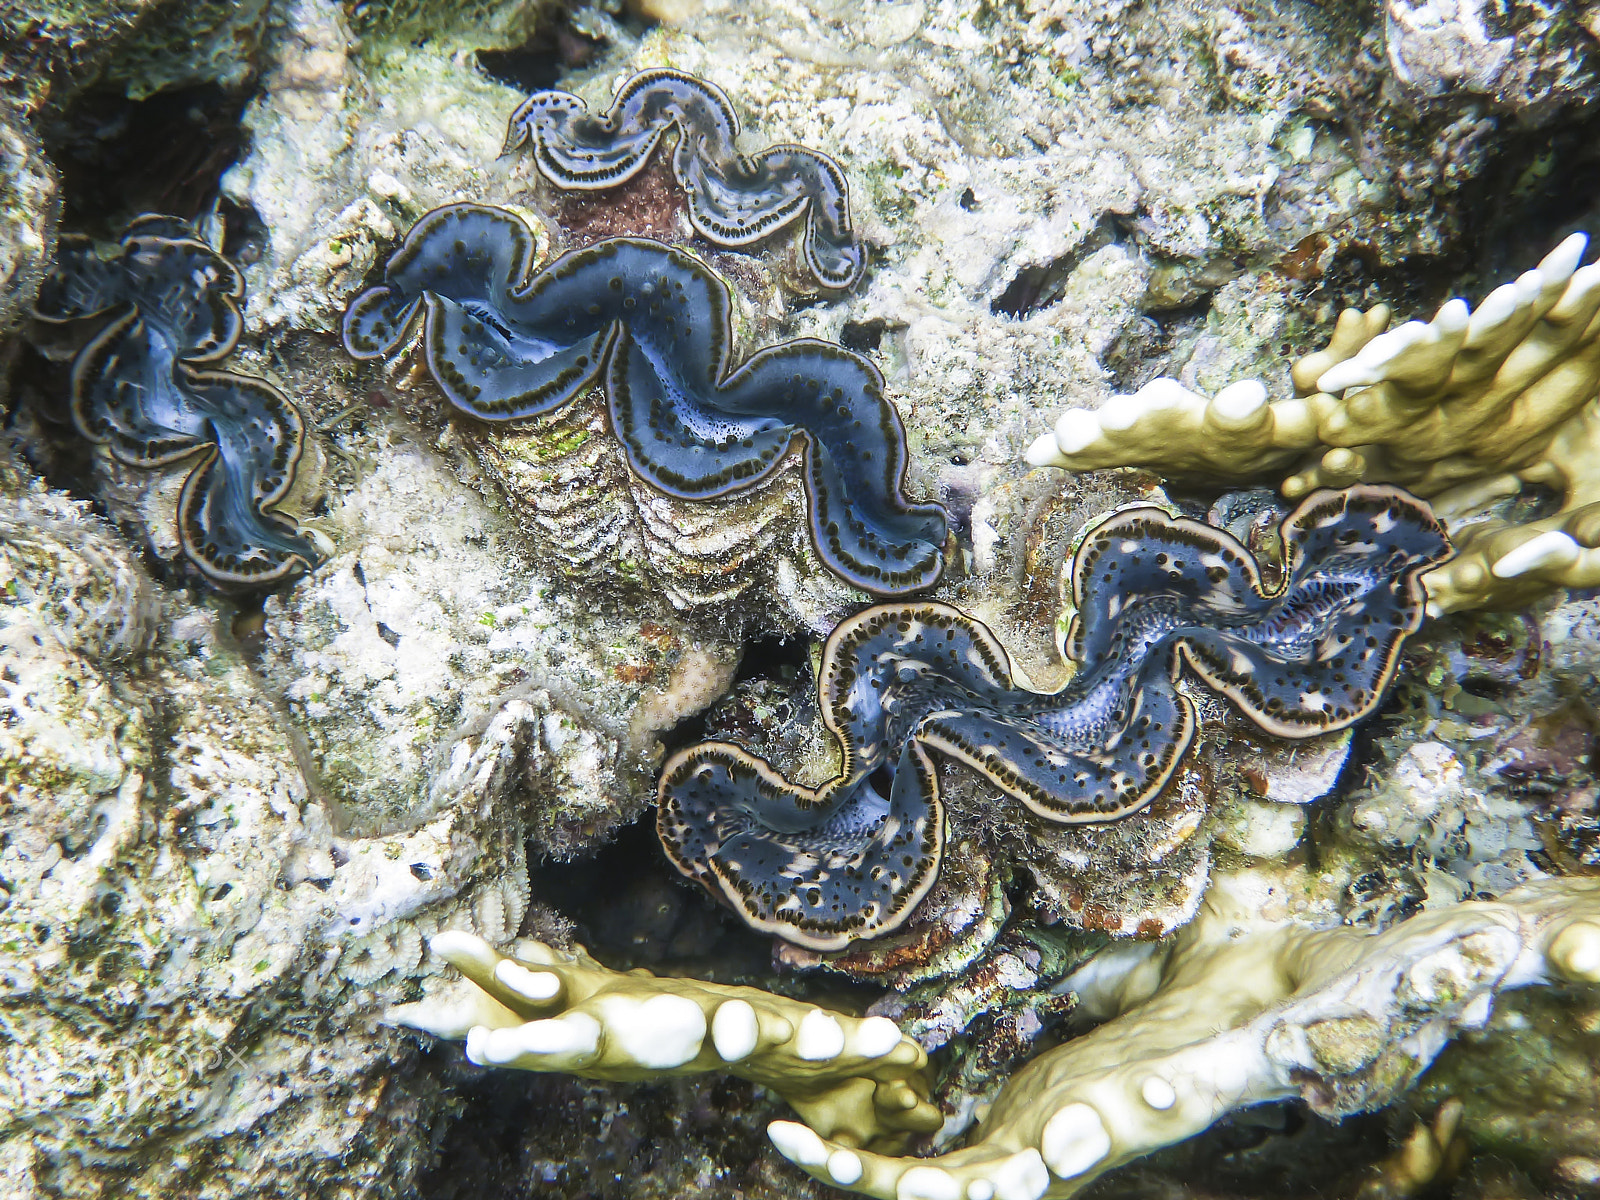 Panasonic DMC-FT4 sample photo. Four giant clams on the coral reef in the red sea photography